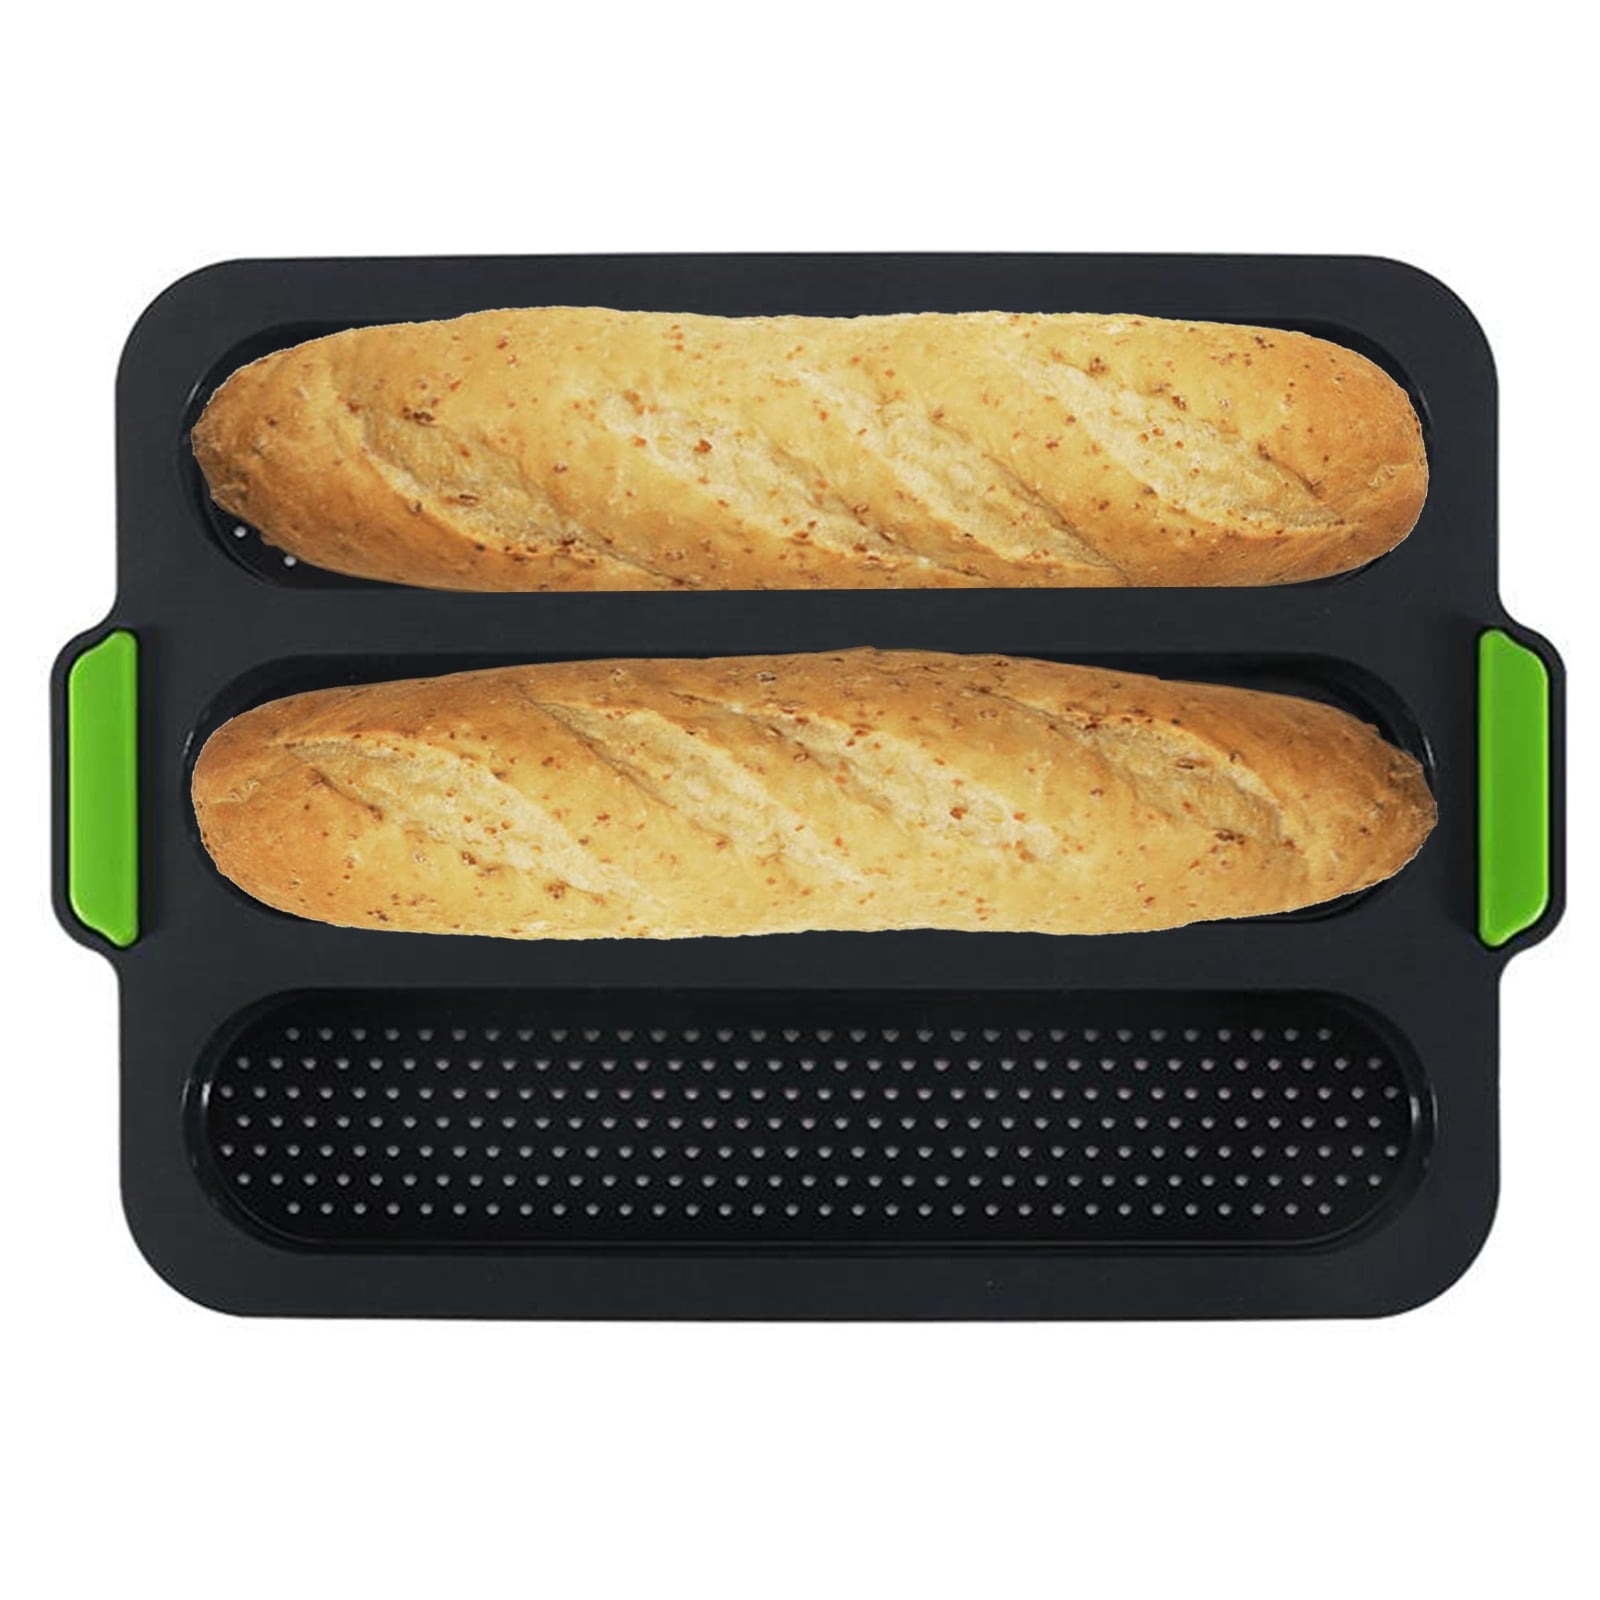 Kitchen French Bread Stick Wave Mold Cake Shop Baguette Bread Baking Mould Tray